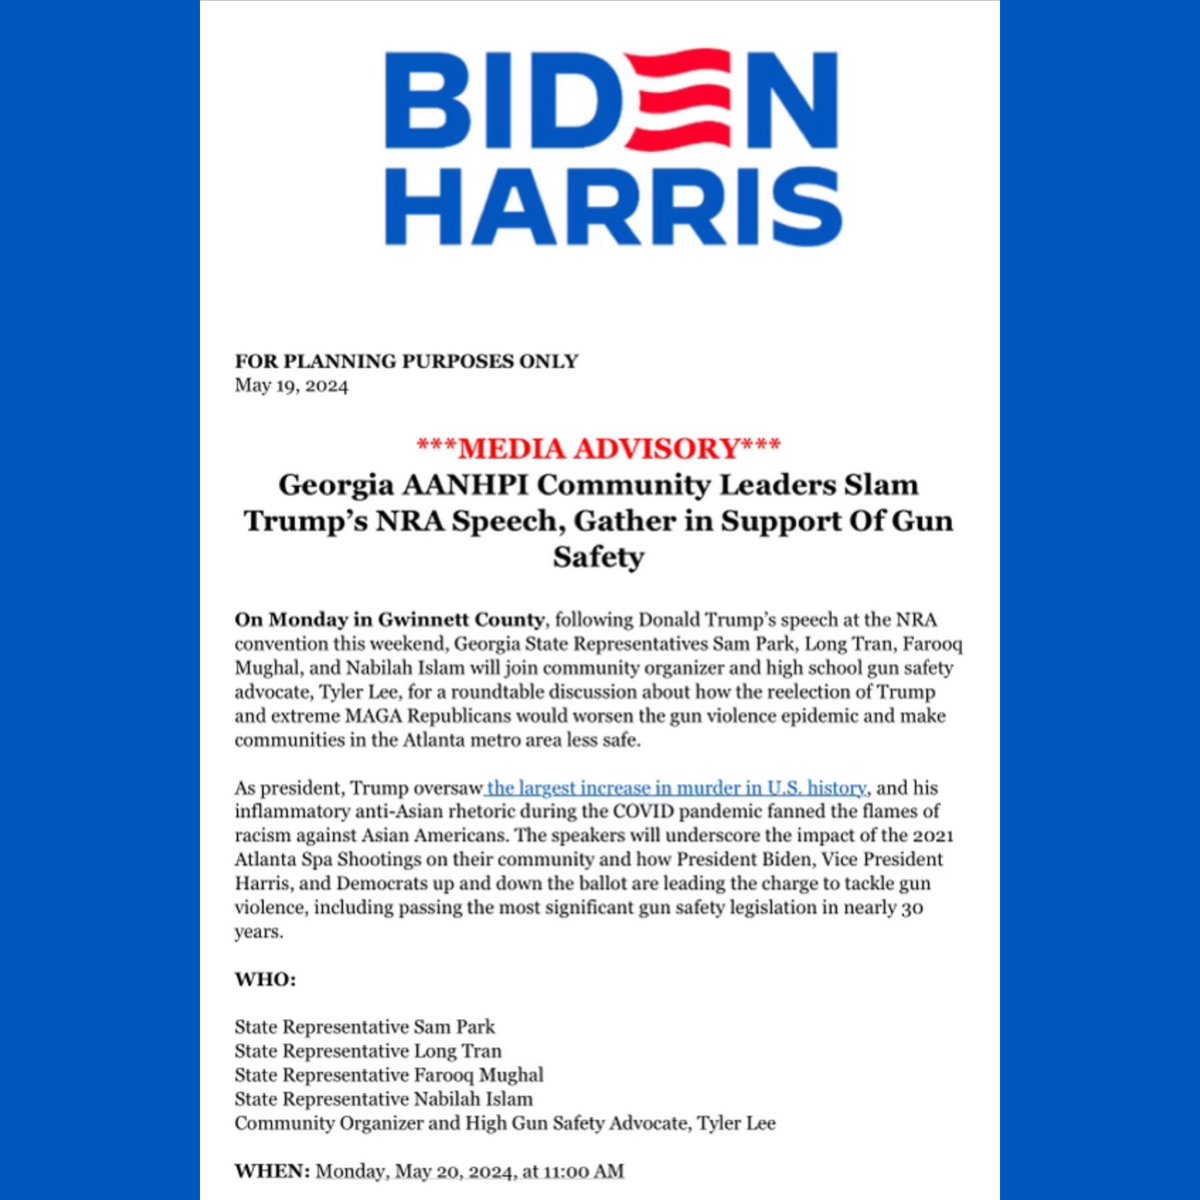 In the wake of Trump’s speech to the NRA this weekend, join Georgia’s #AANHPI leaders on Monday 5/20 to discuss the Biden-Harris administration’s historic work on gun safety, and how Trump’s extremist GOP agenda will make our community less safe. RSVP: docs.google.com/forms/d/e/1FAI…